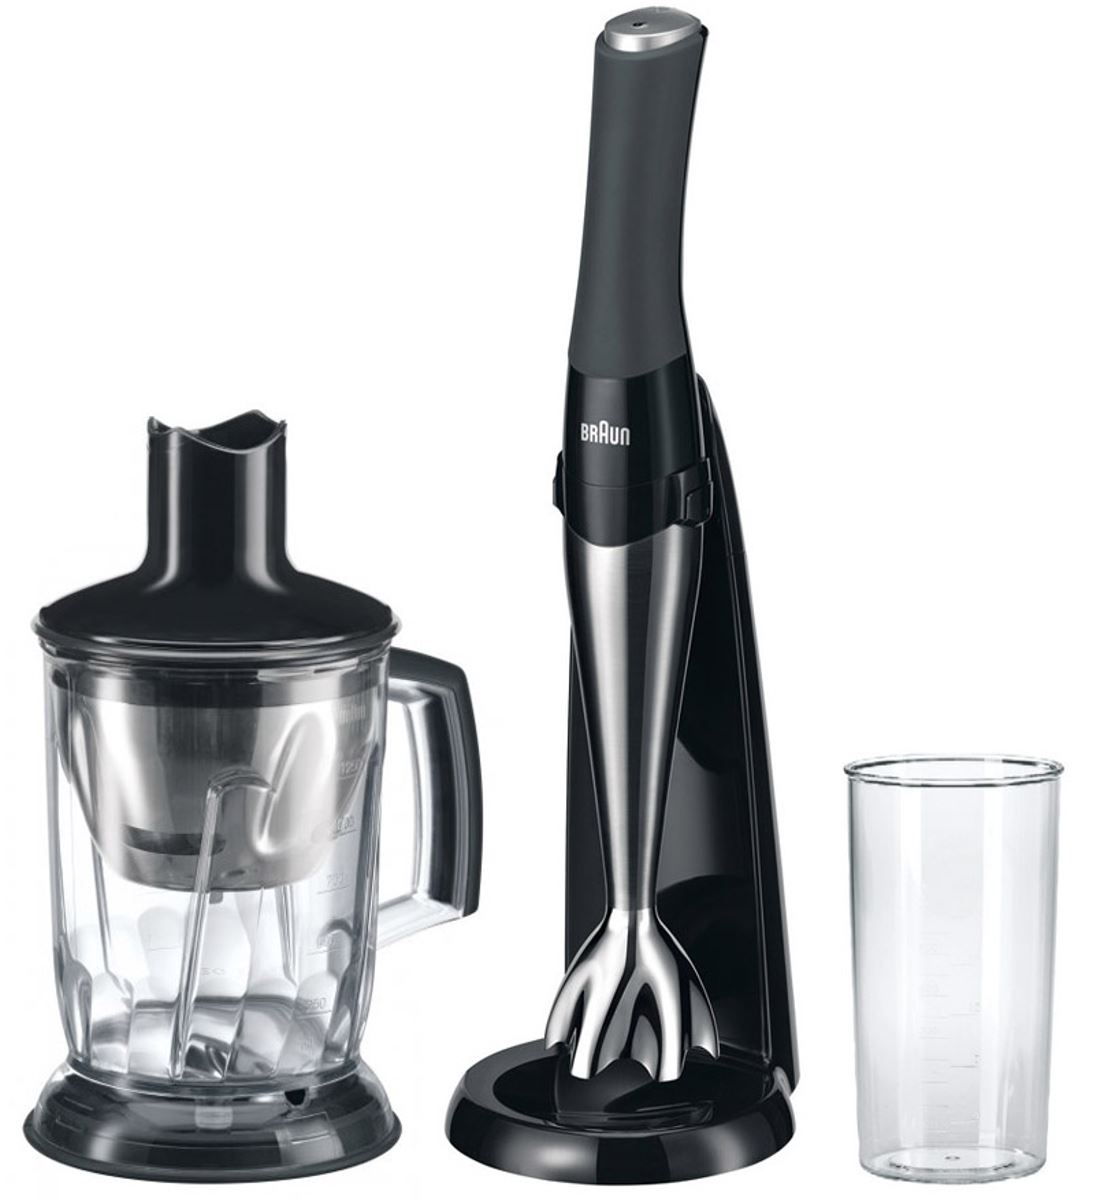 https://www.220stores.com/resize/Shared/Images/Product/Braun-Cordless-Hand-Blender-with-Ice-Crusher-Chopper/23381_1.jpg?